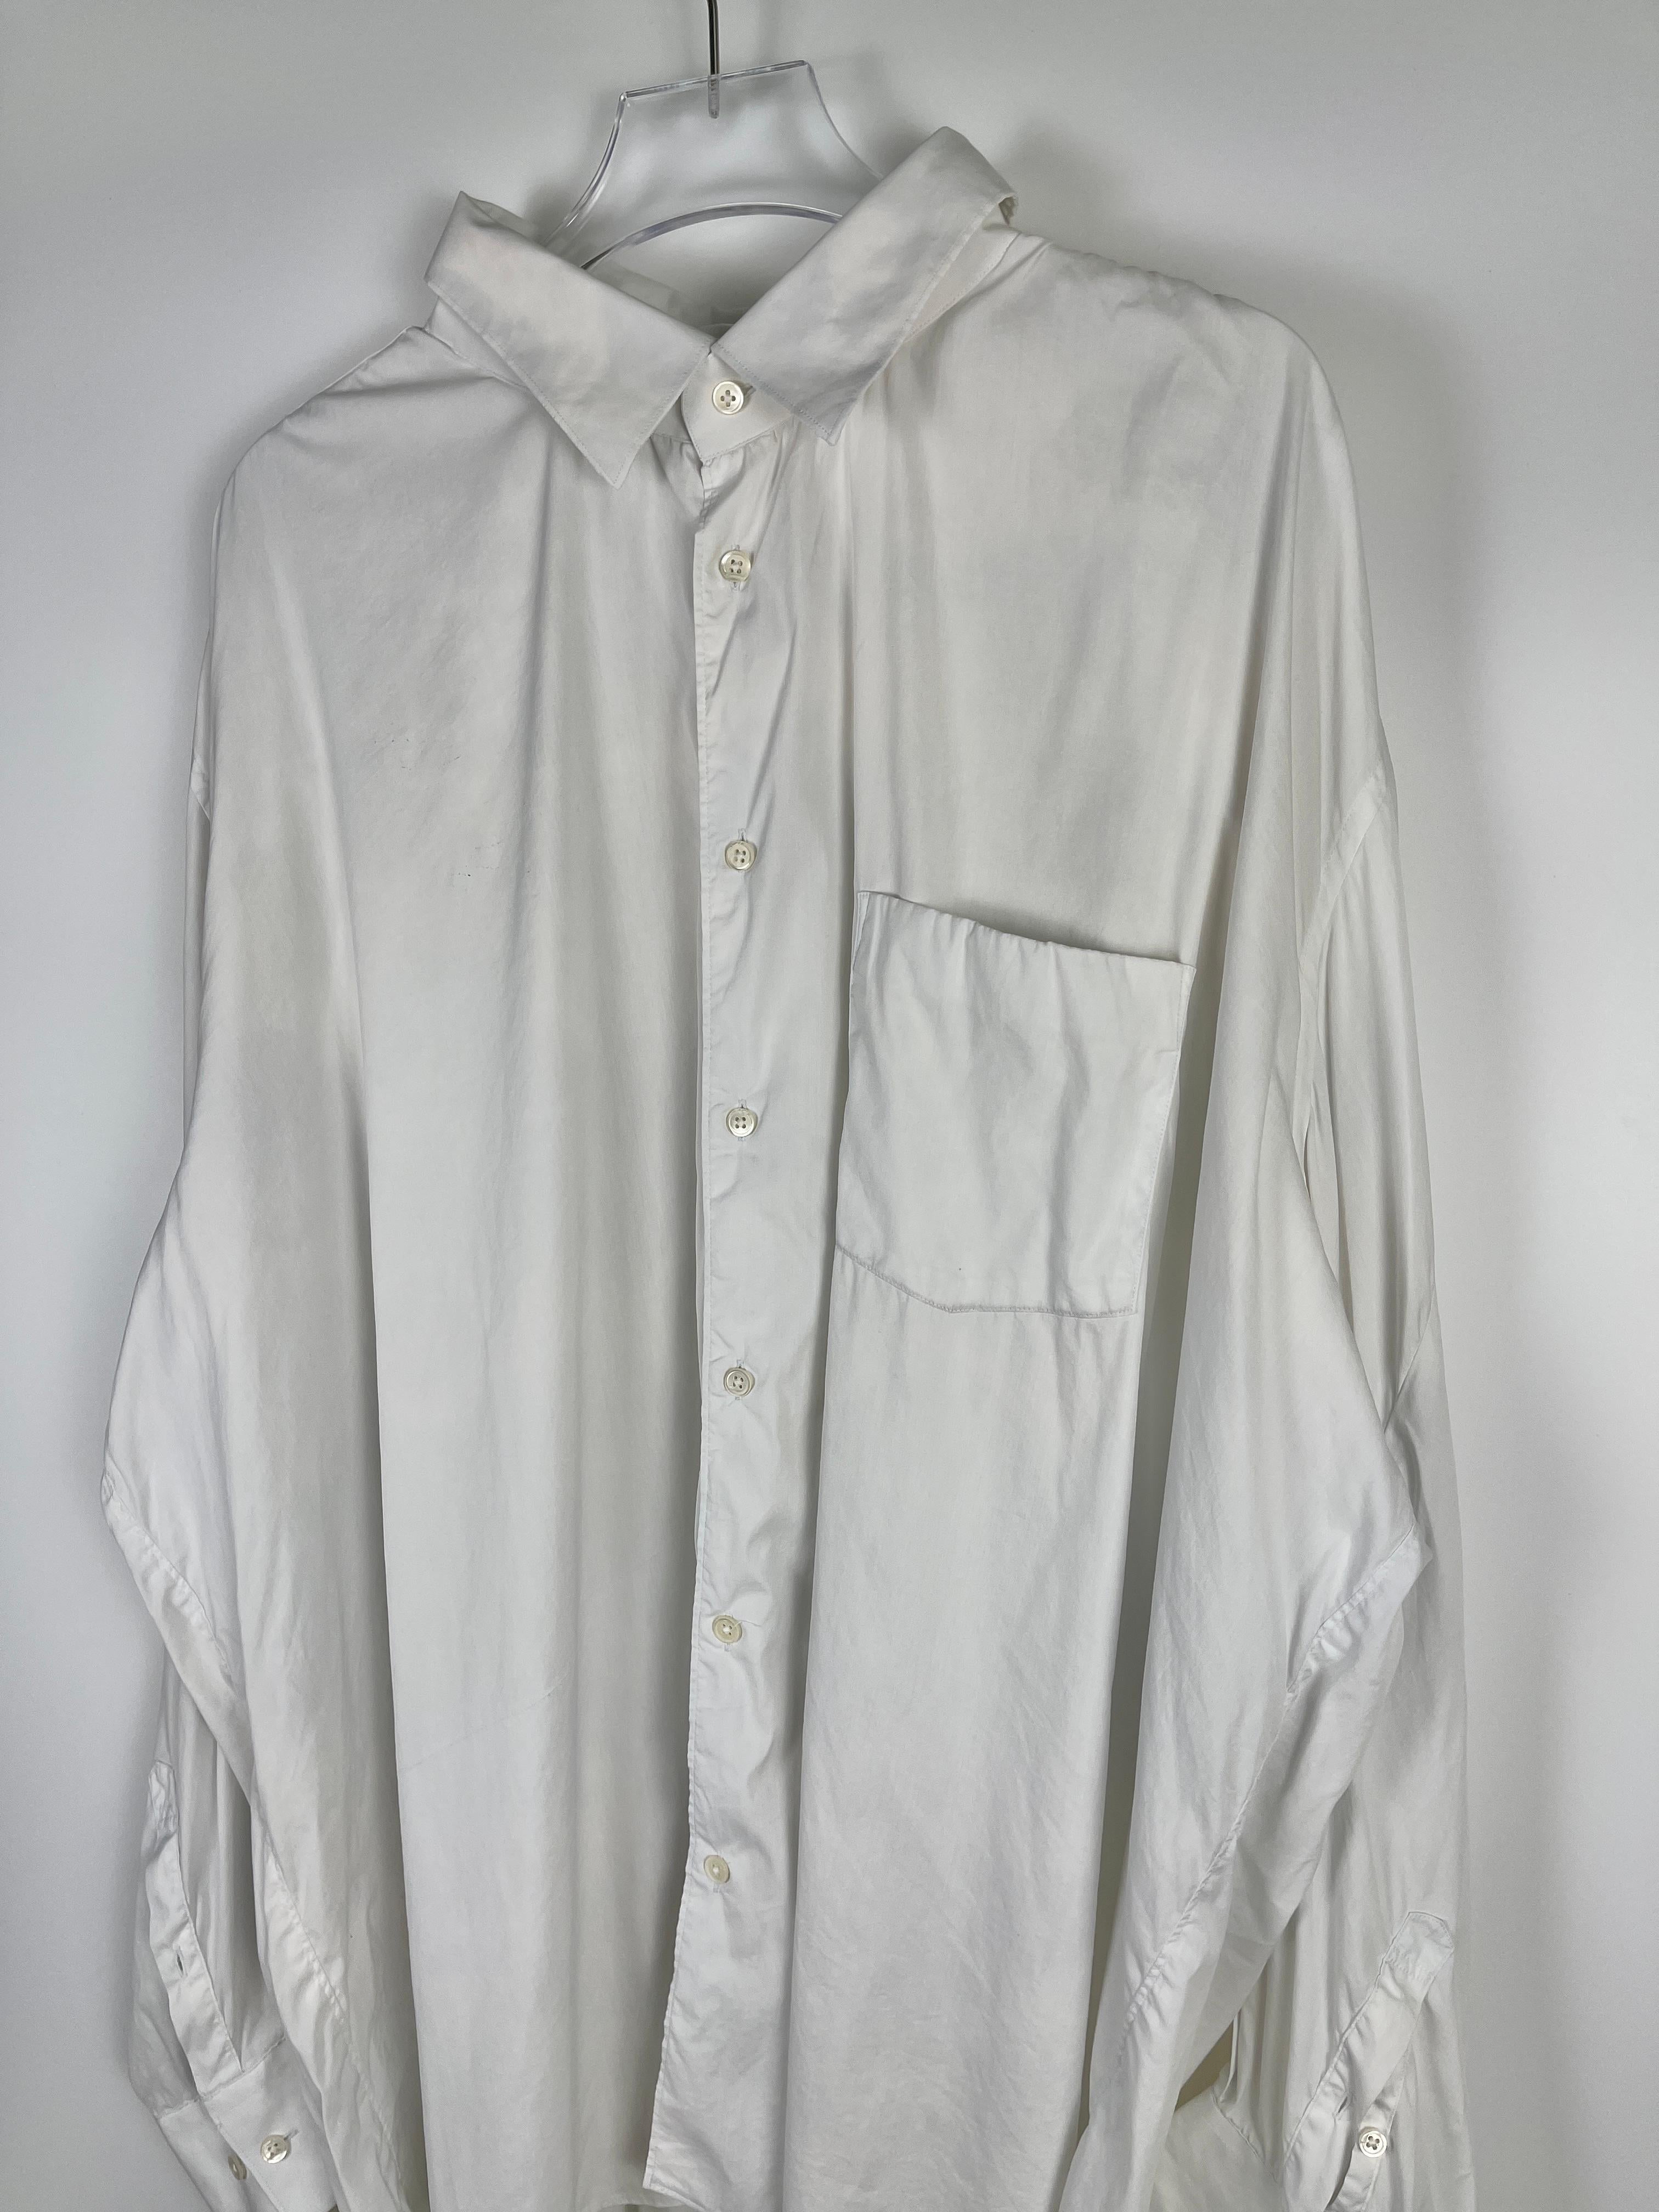 Vetements x Comme des Garcons SHIRT Basic Oversized Shirt In Good Condition For Sale In Tương Mai Ward, Hoang Mai District